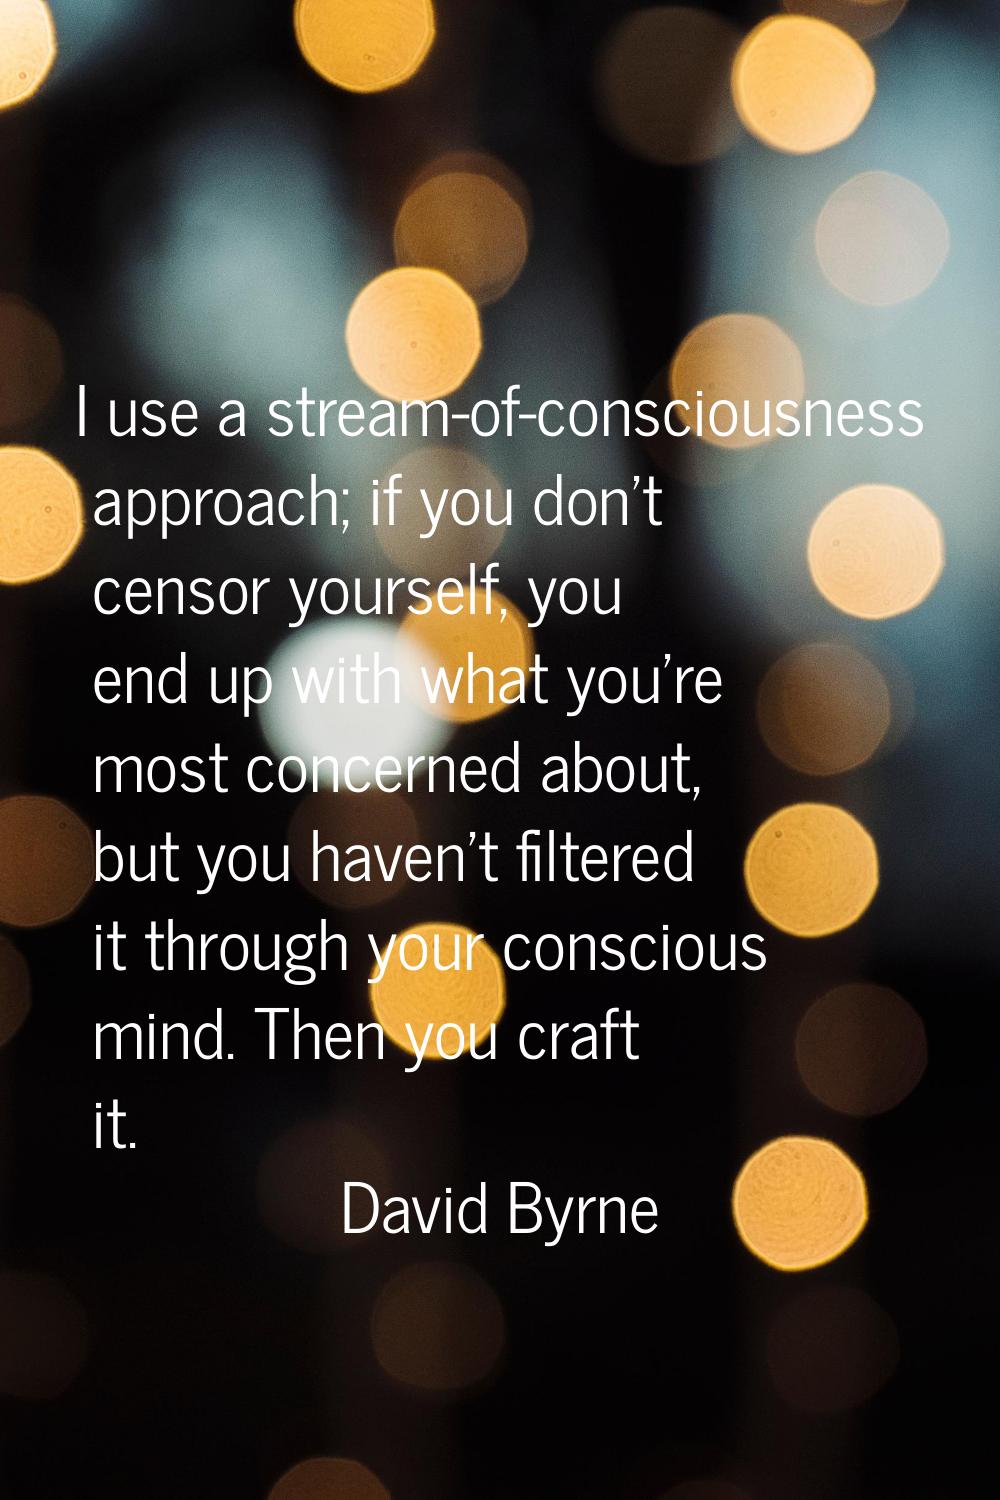 I use a stream-of-consciousness approach; if you don't censor yourself, you end up with what you're